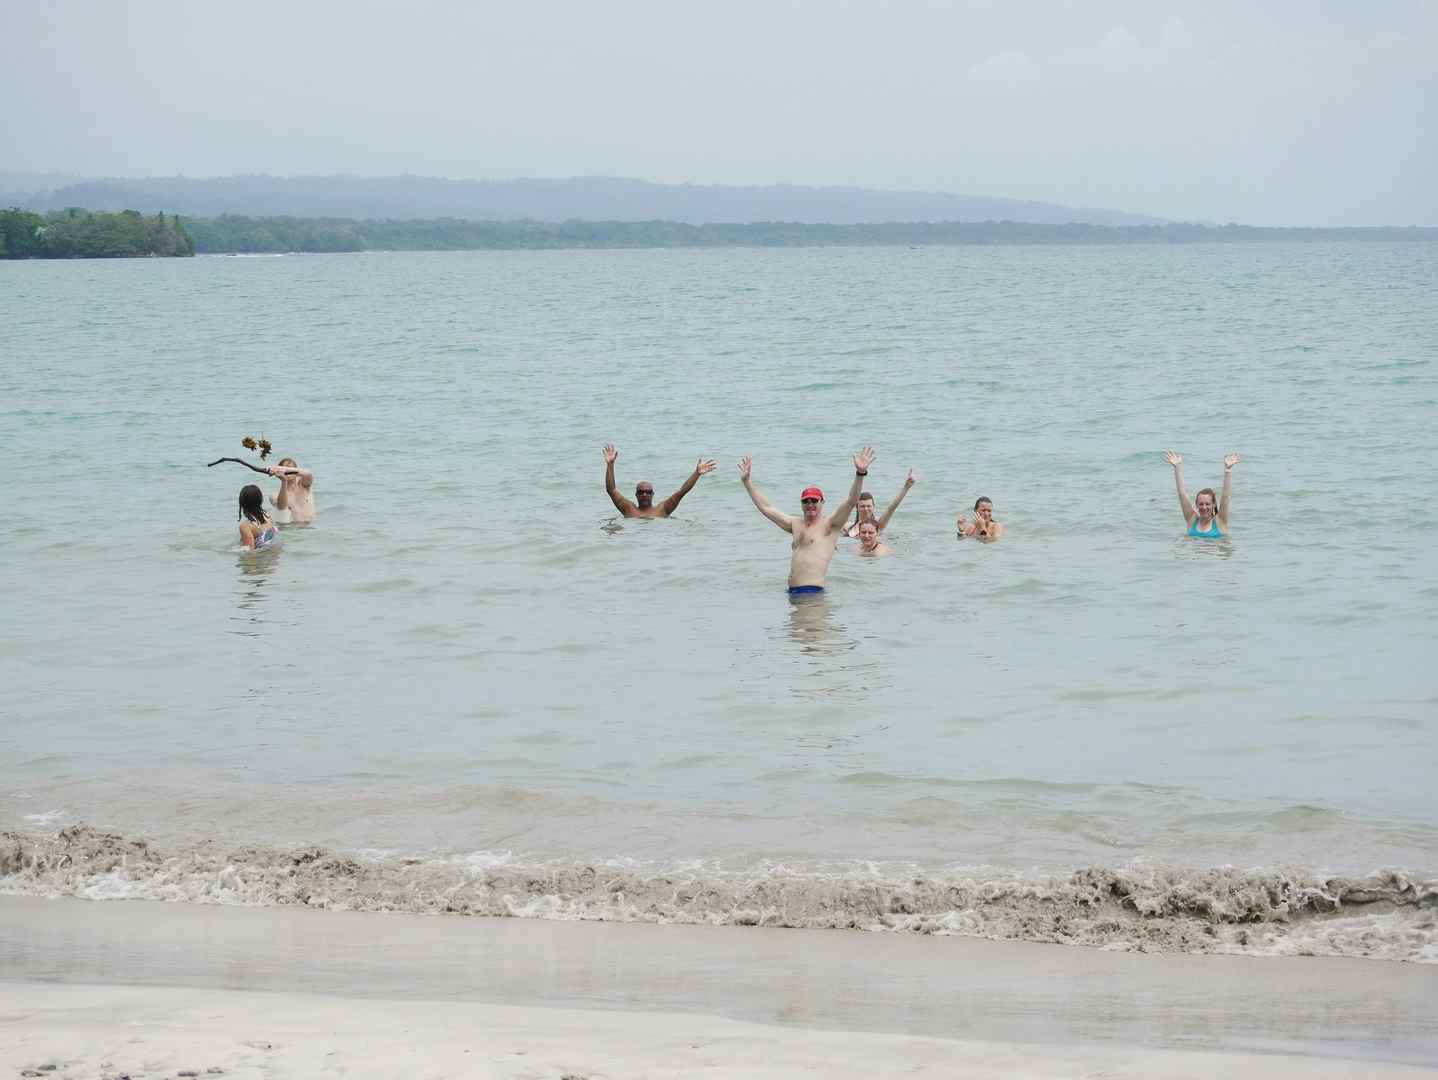 Happy people in the Caribbean Sea, Costa Rica.